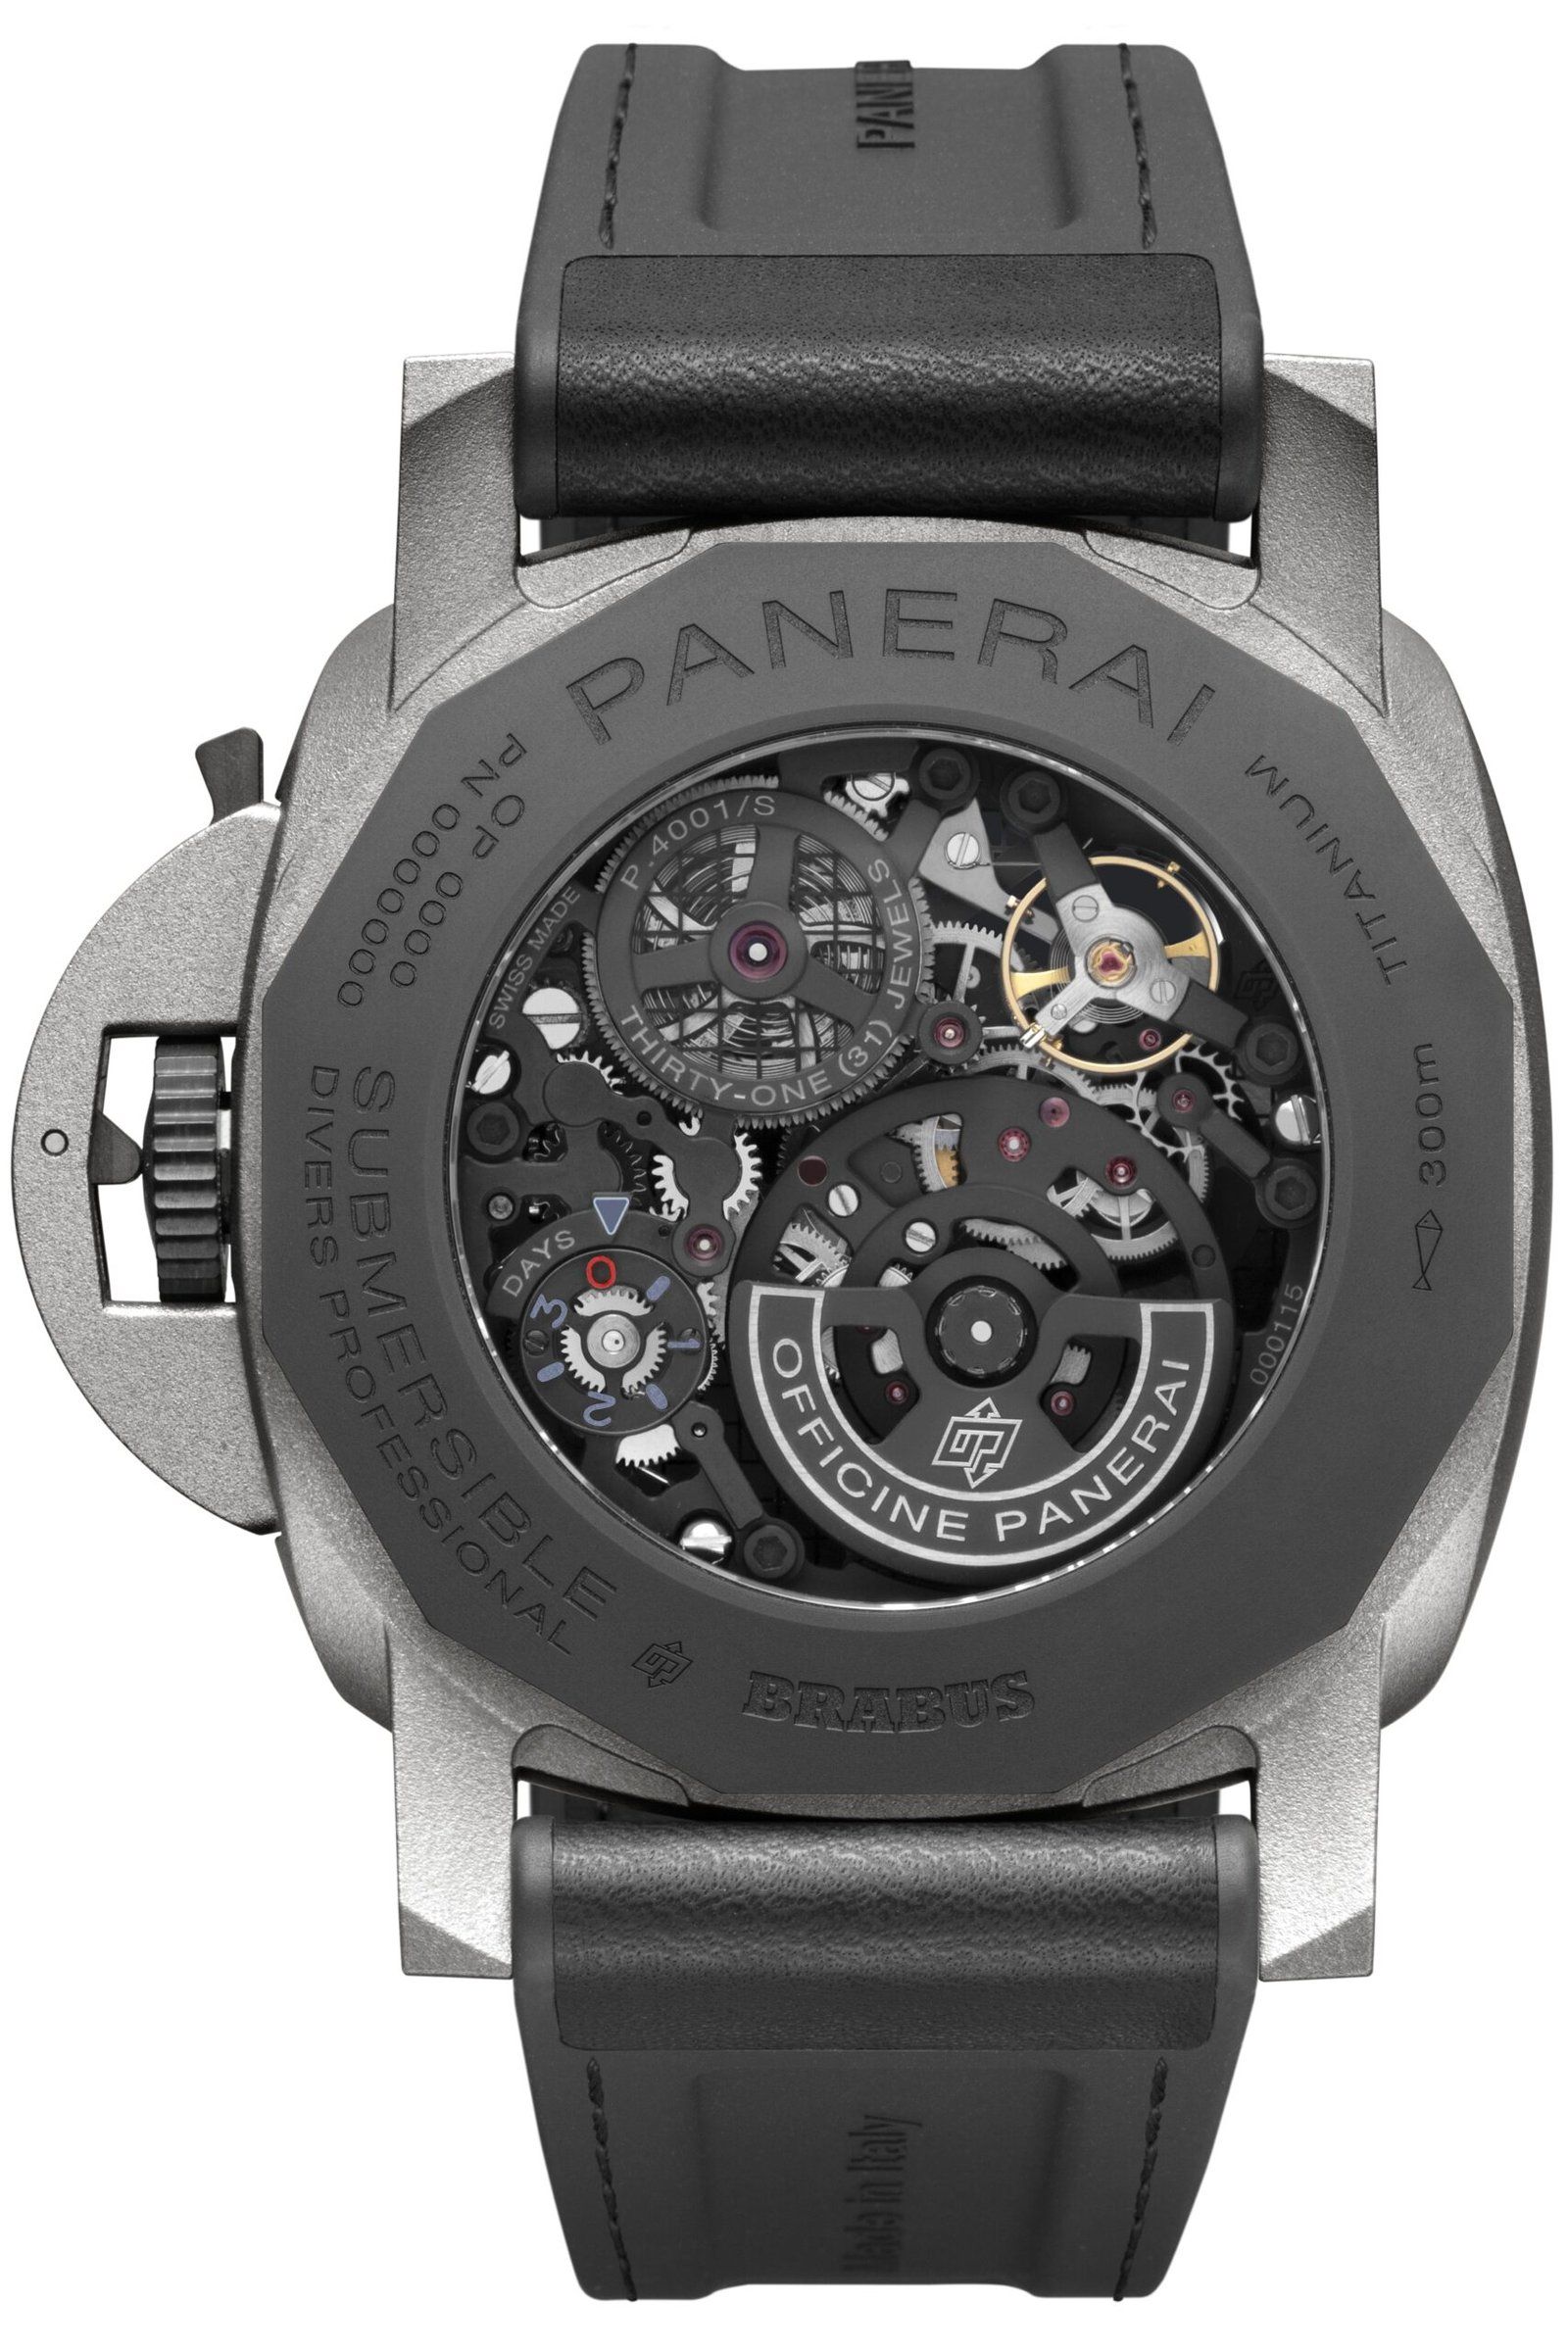 Surf Those Waves With The Panerai Submersible S Brabus Blue Shadow Edition